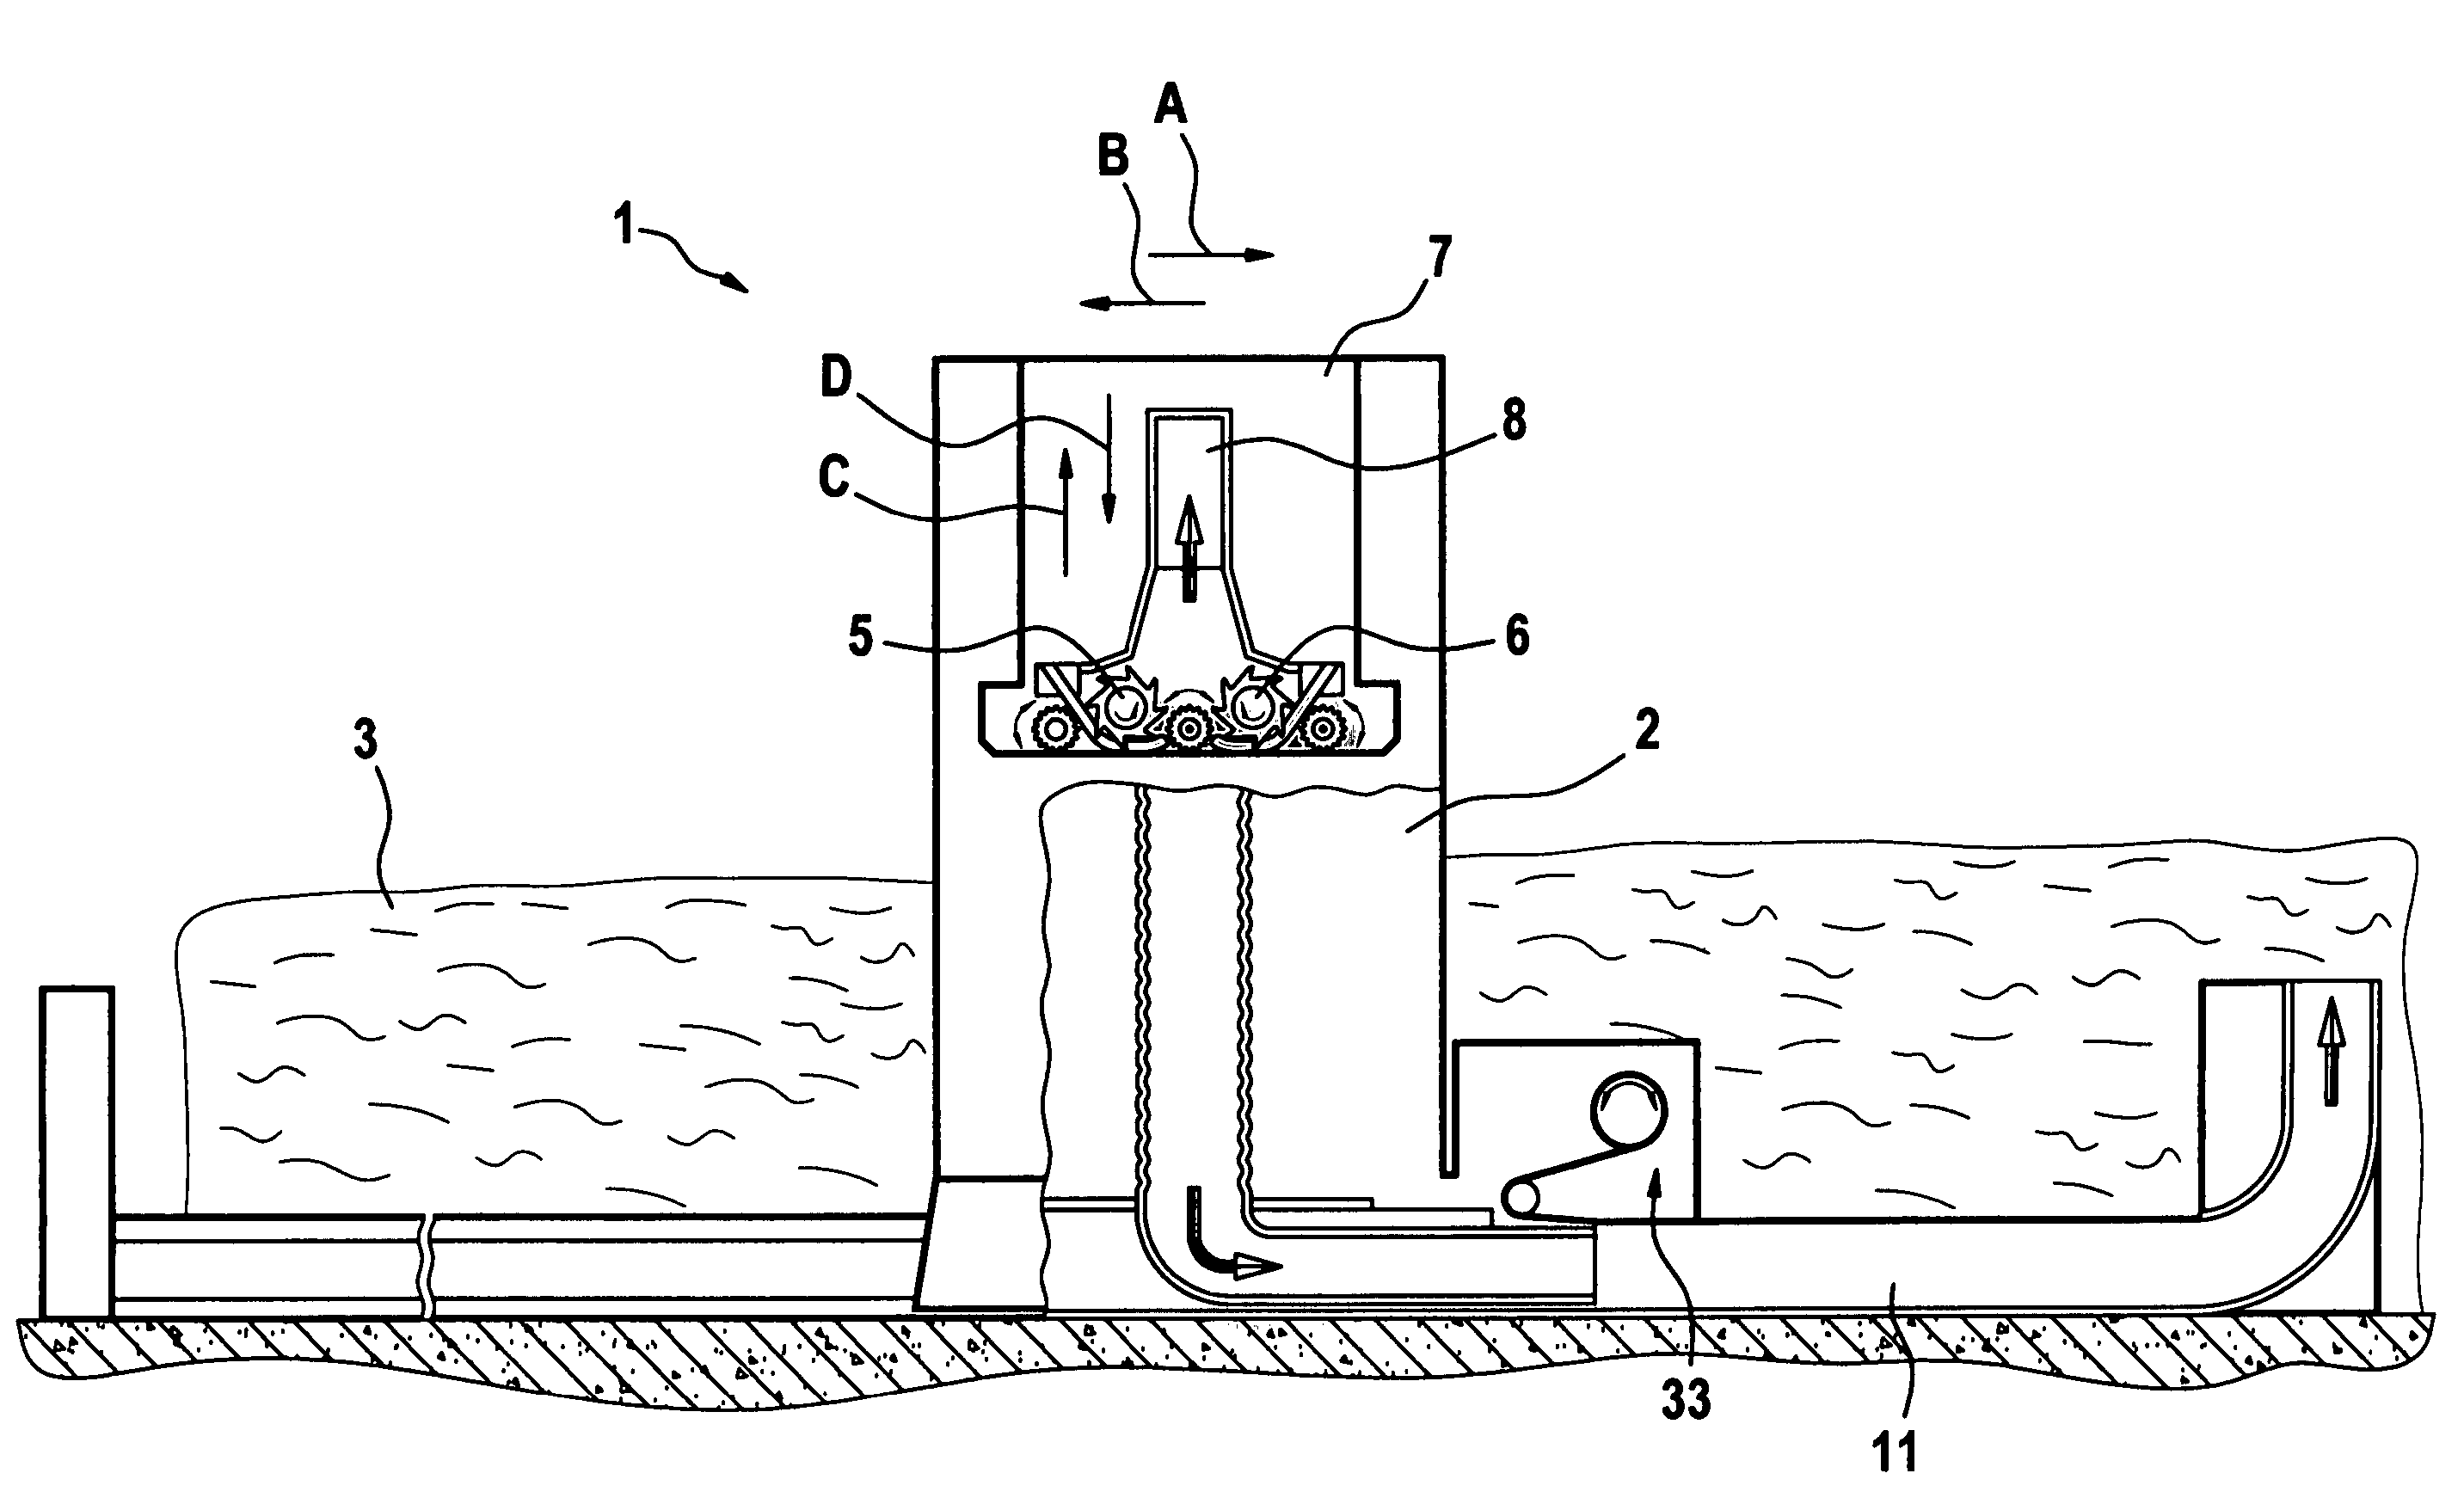 Apparatus for stripping fibre material from textile fibre bales of spinning material, for example cotton, synthetic fibres and the like